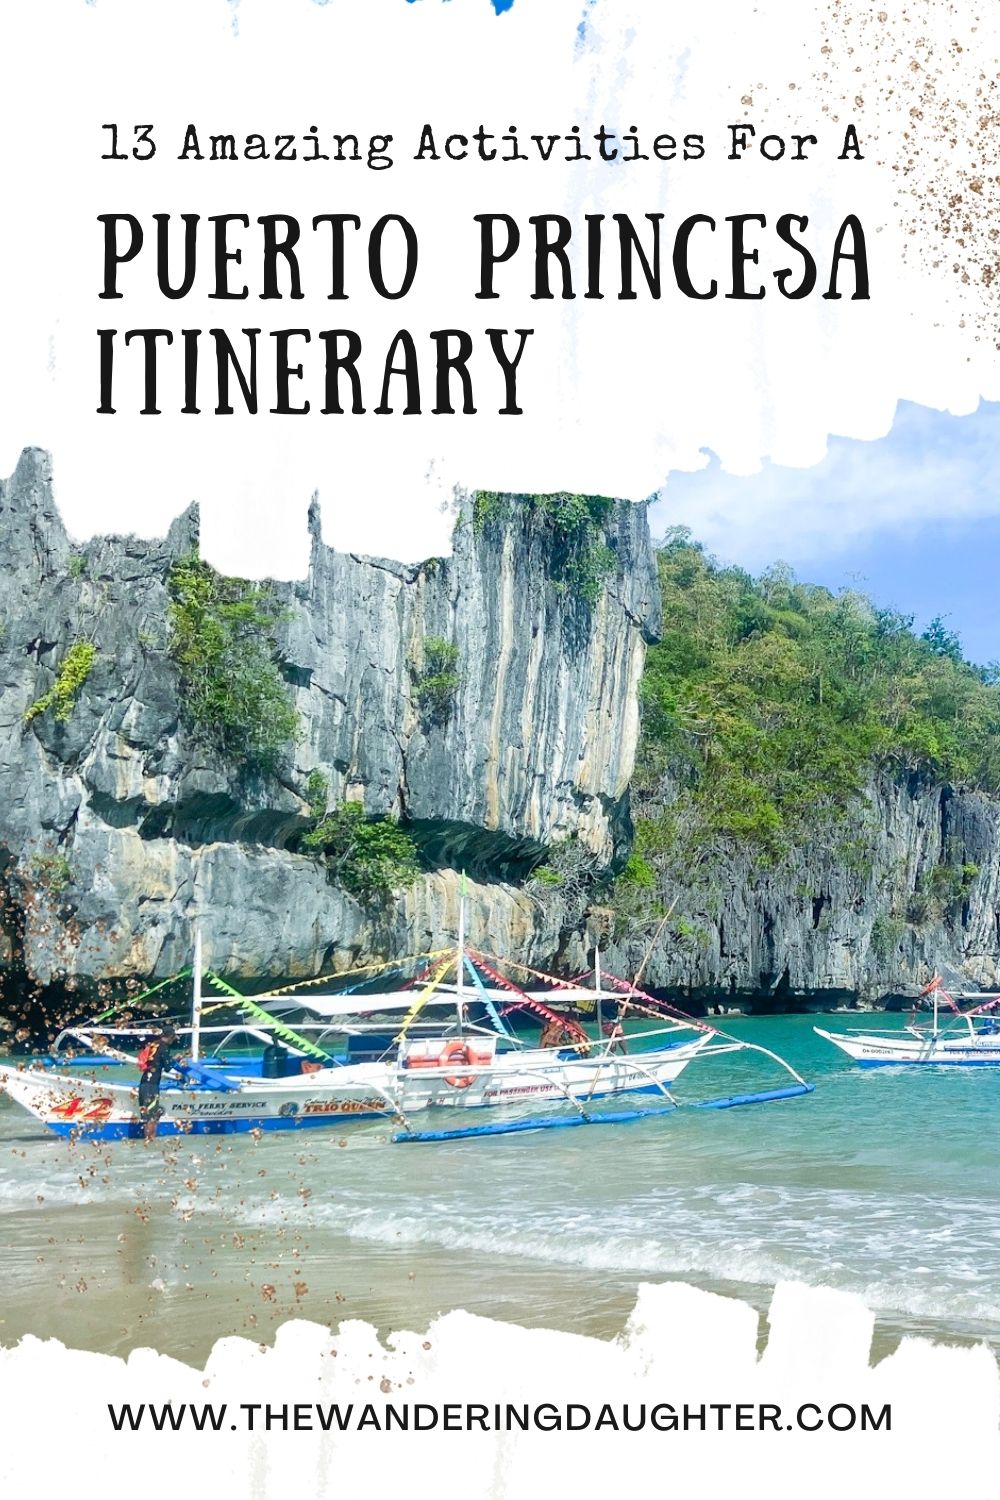 13 Amazing Activities for A Puerto Princesa Itinerary: Visiting Palawan With Kids | The Wandering Daughter | Catamaran boats on the beach in front of rocky cliffs in Palawan, Philippines, with text overlay.